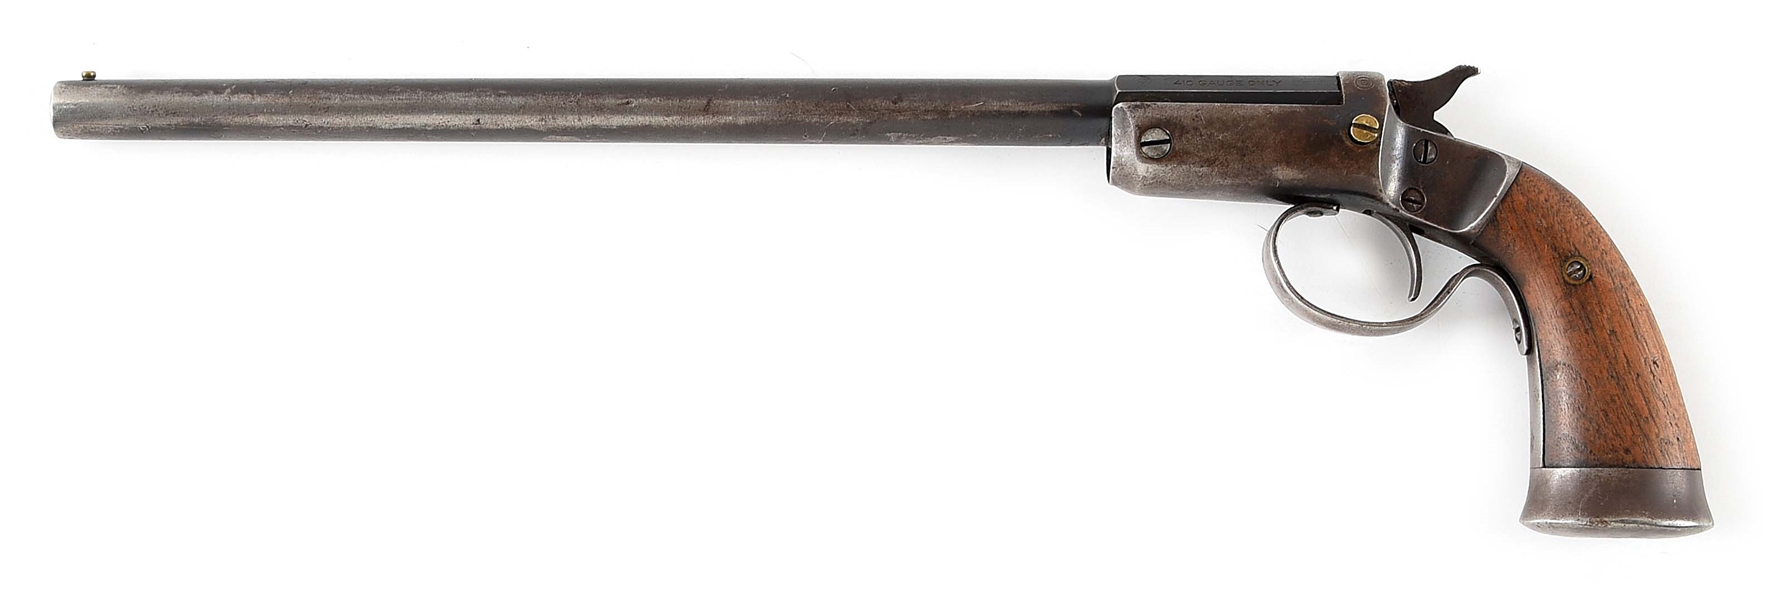 (N) STEVENS ARMS COMPANY SINGLE SHOT .410 BORE PISTOL (ANY OTHER WEAPON).